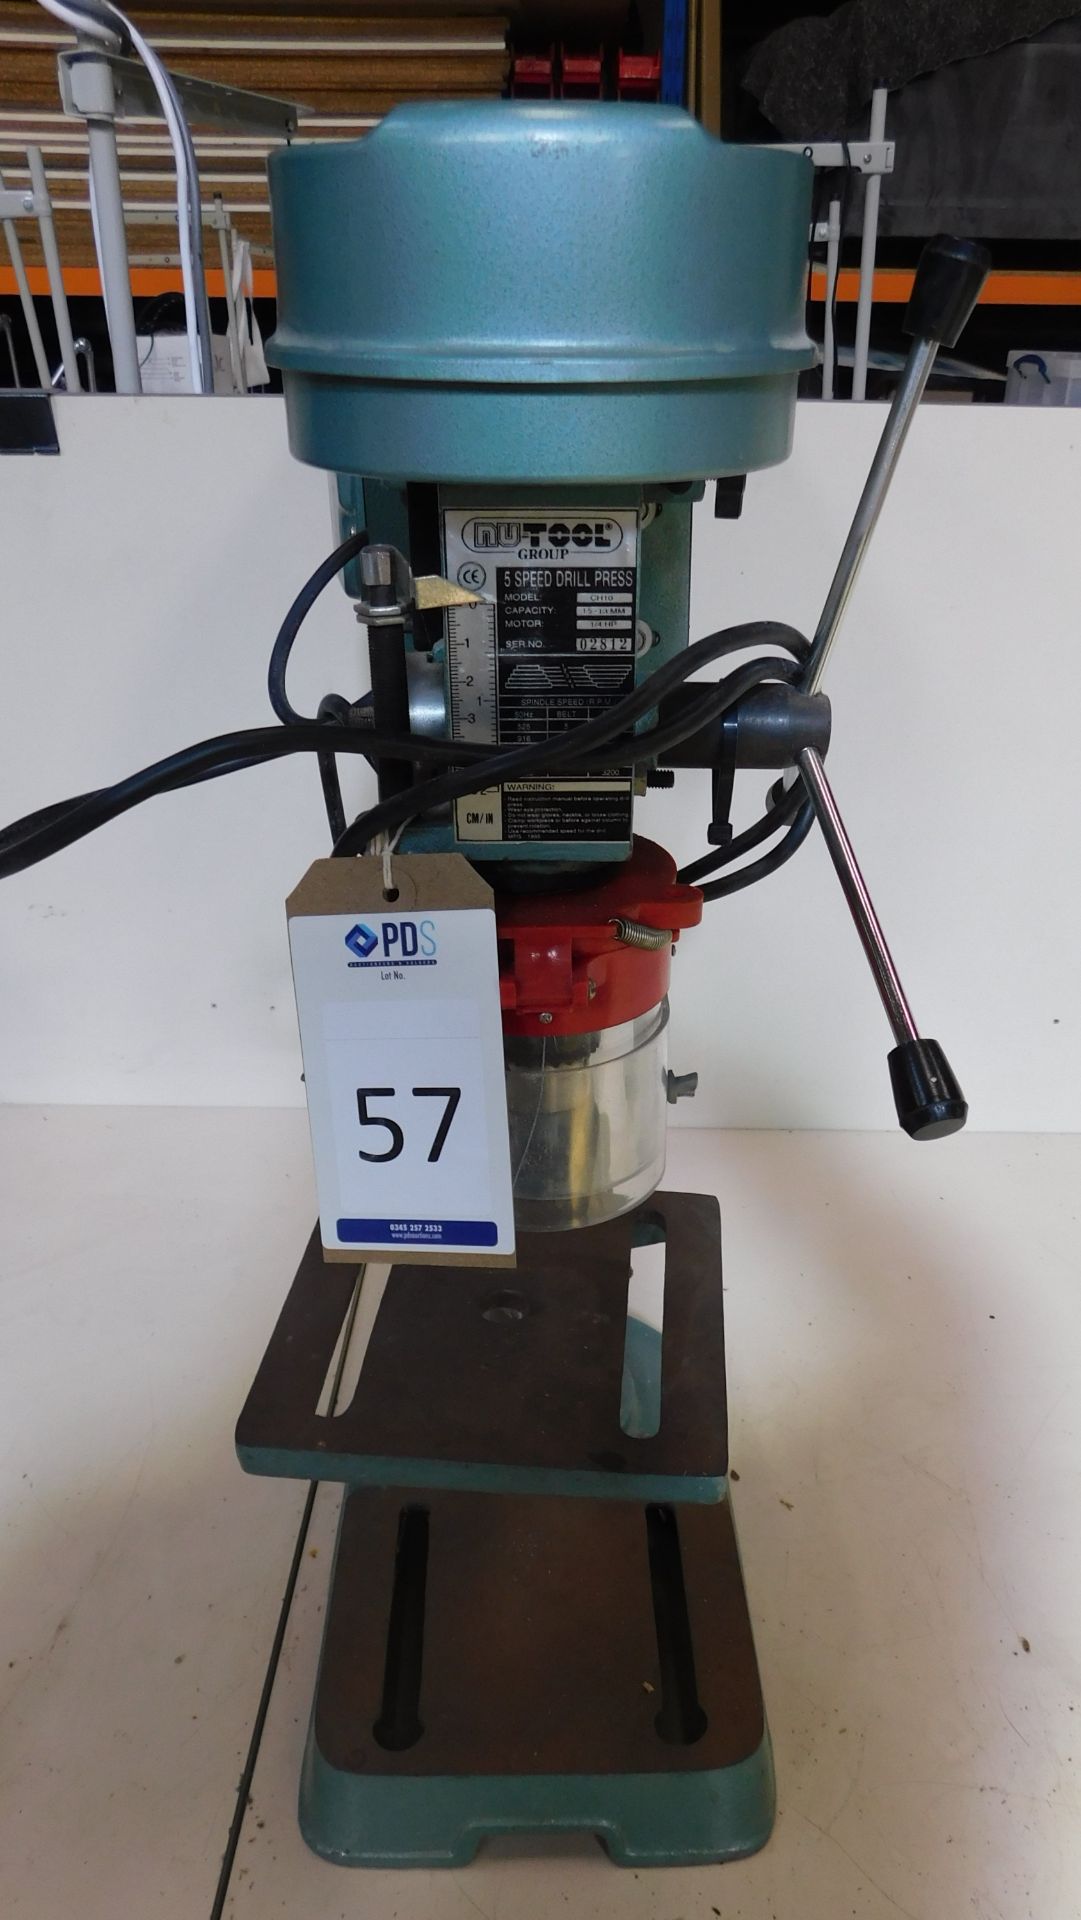 Nutool Power CH10 02812 5-Speed Bench Top Drill (Location: Brentwood. Please Refer to General